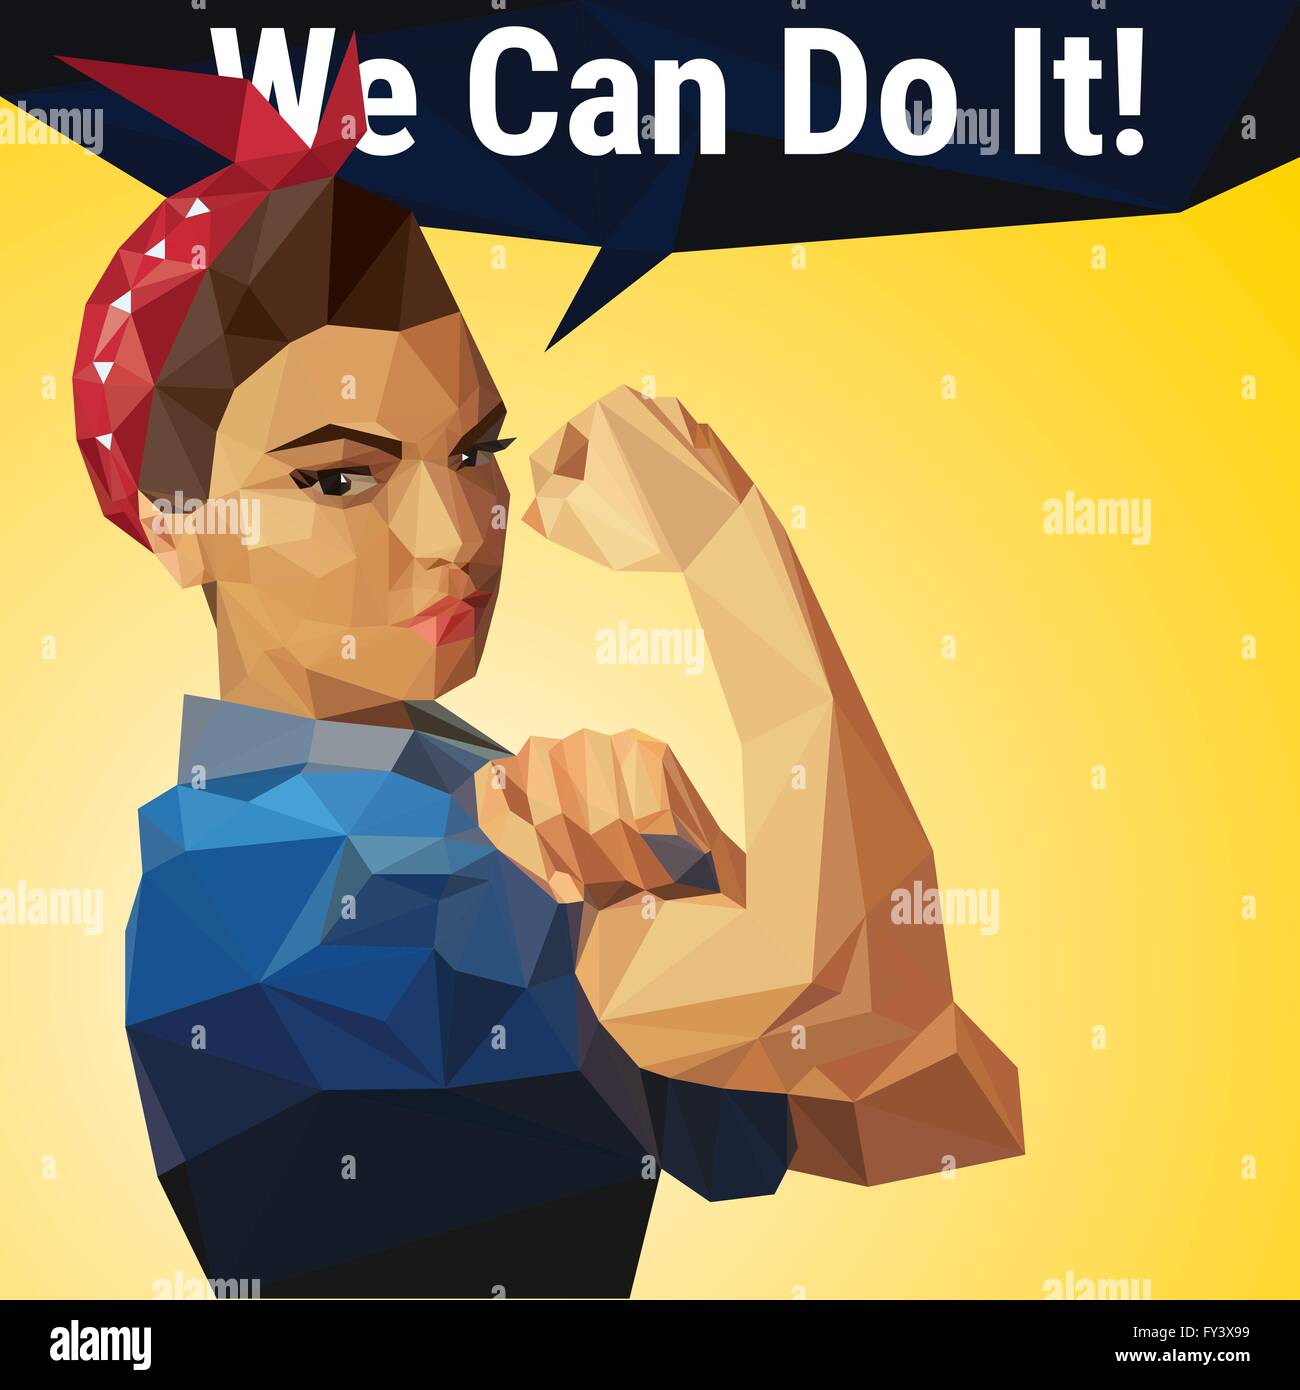 We Can Do It. Woman's symbol of female power and industry made with polygons Stock Vector